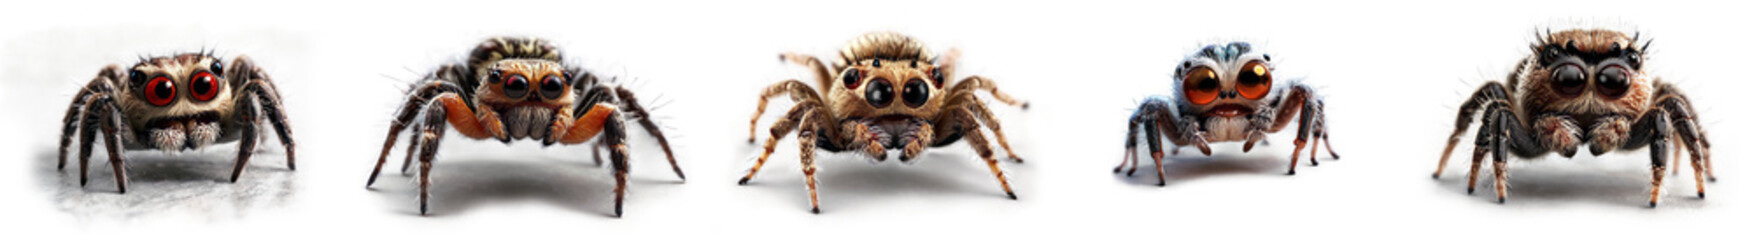 Adorable collection of 5 cartoon jumping spider characters on transparent alpha background. Perfect for playful designs and insect enthusiasts